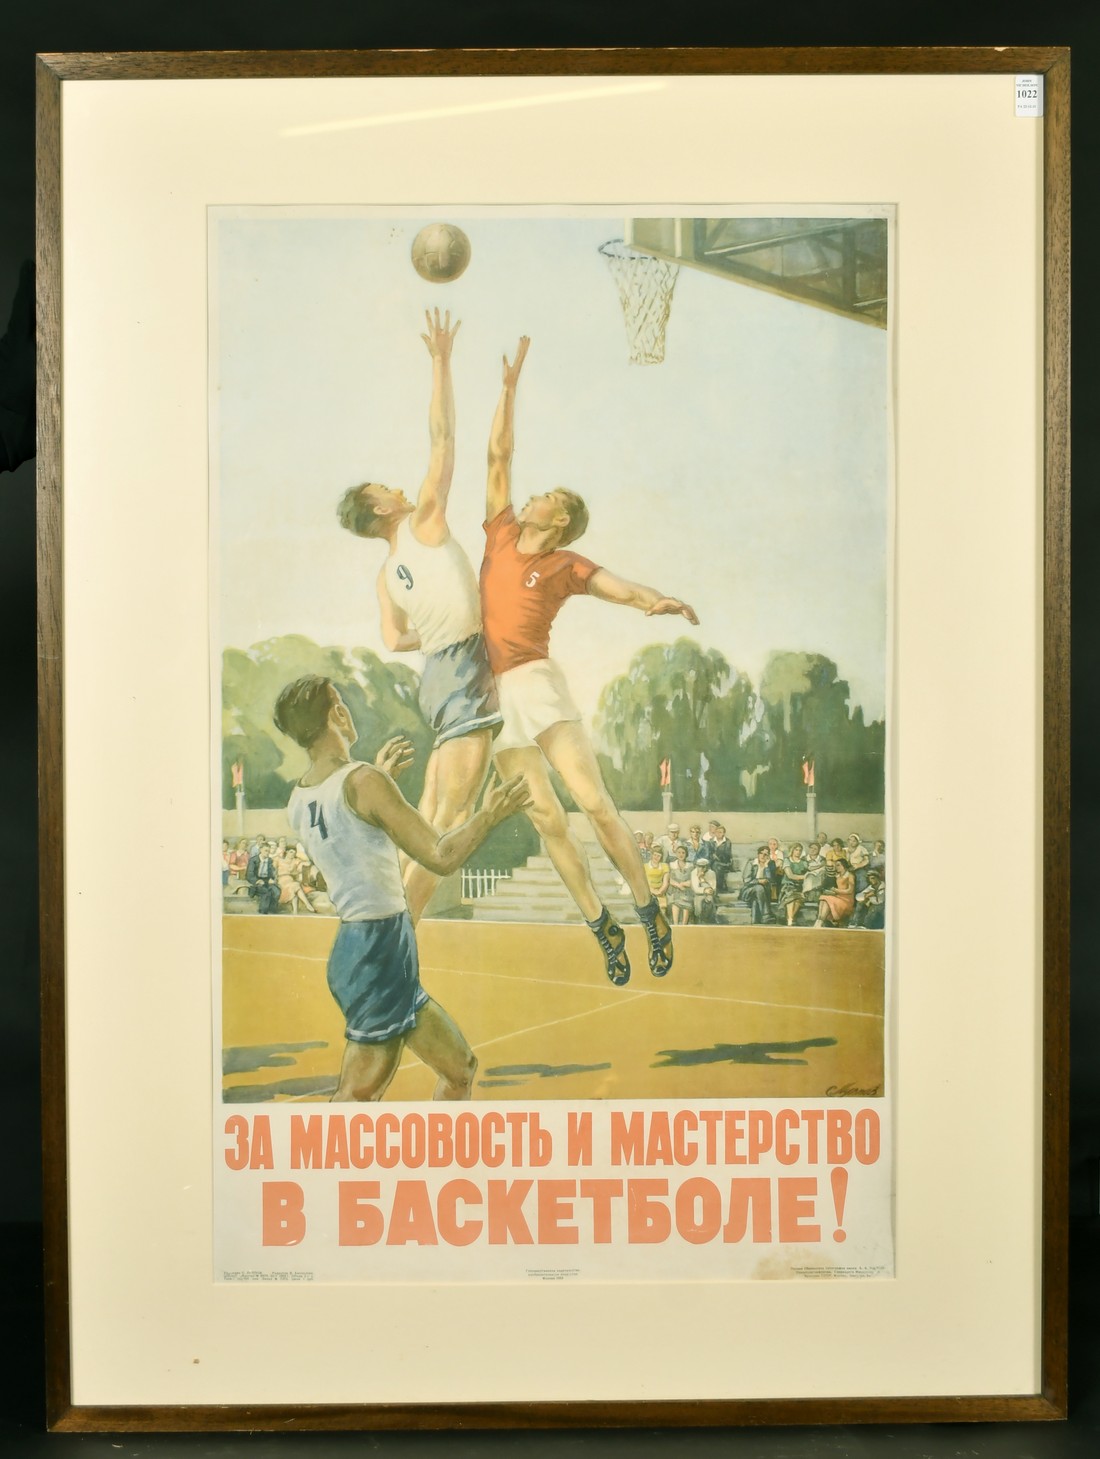 Russian, Circa 1953, a framed poster advertising a basketball tournament, 33" x 21.5". - Image 2 of 3